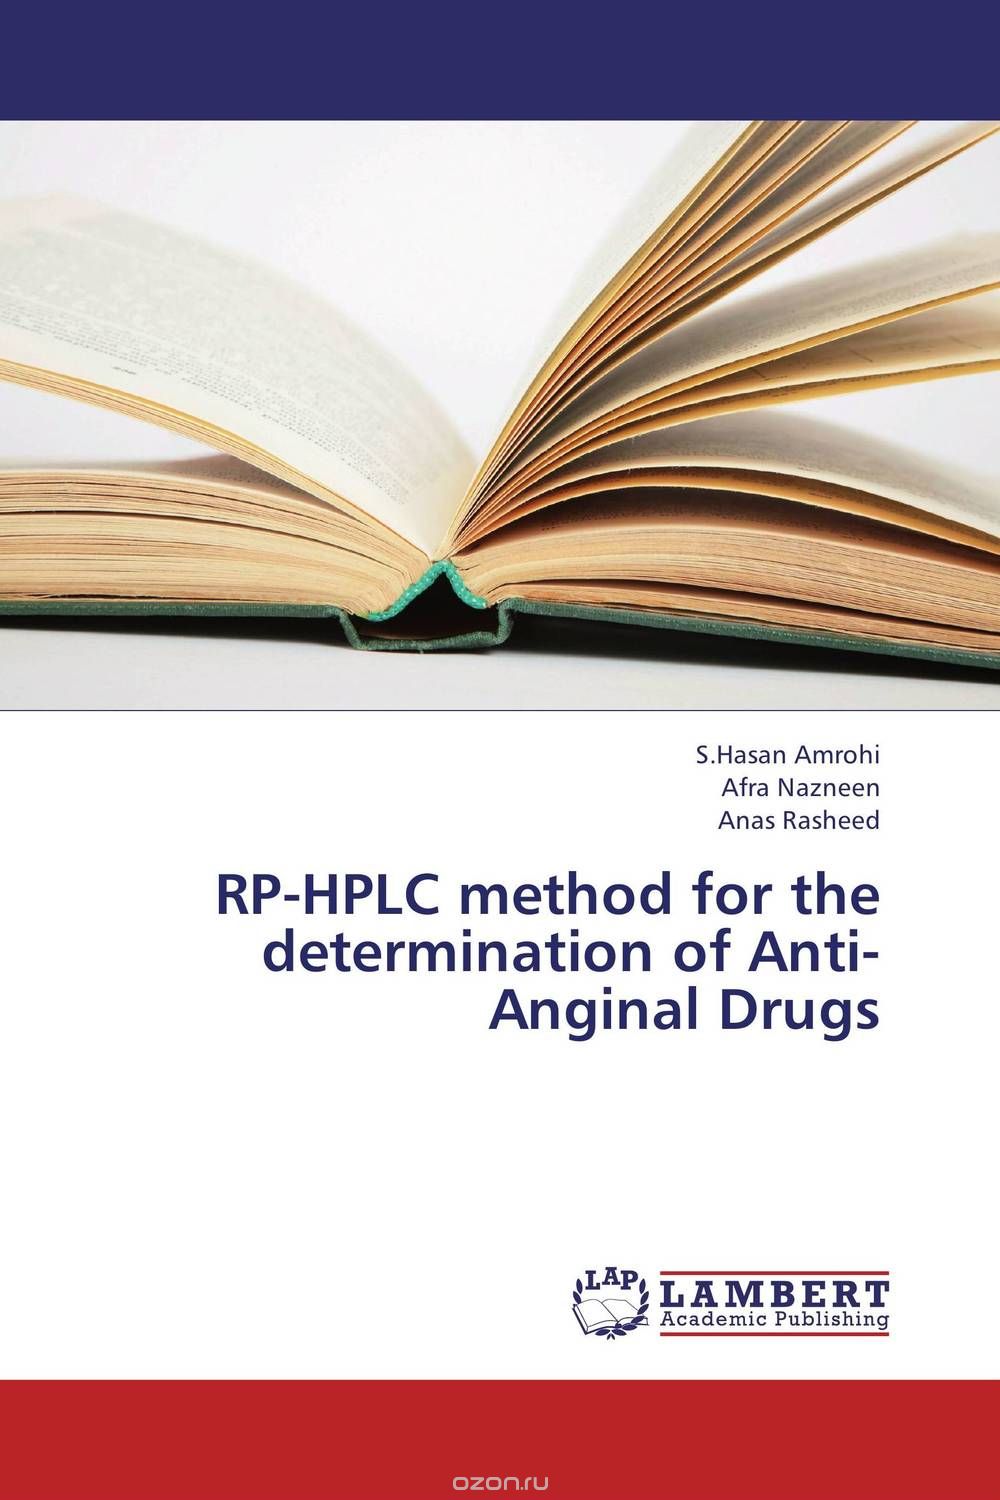 RP-HPLC method for the determination of Anti-Anginal Drugs